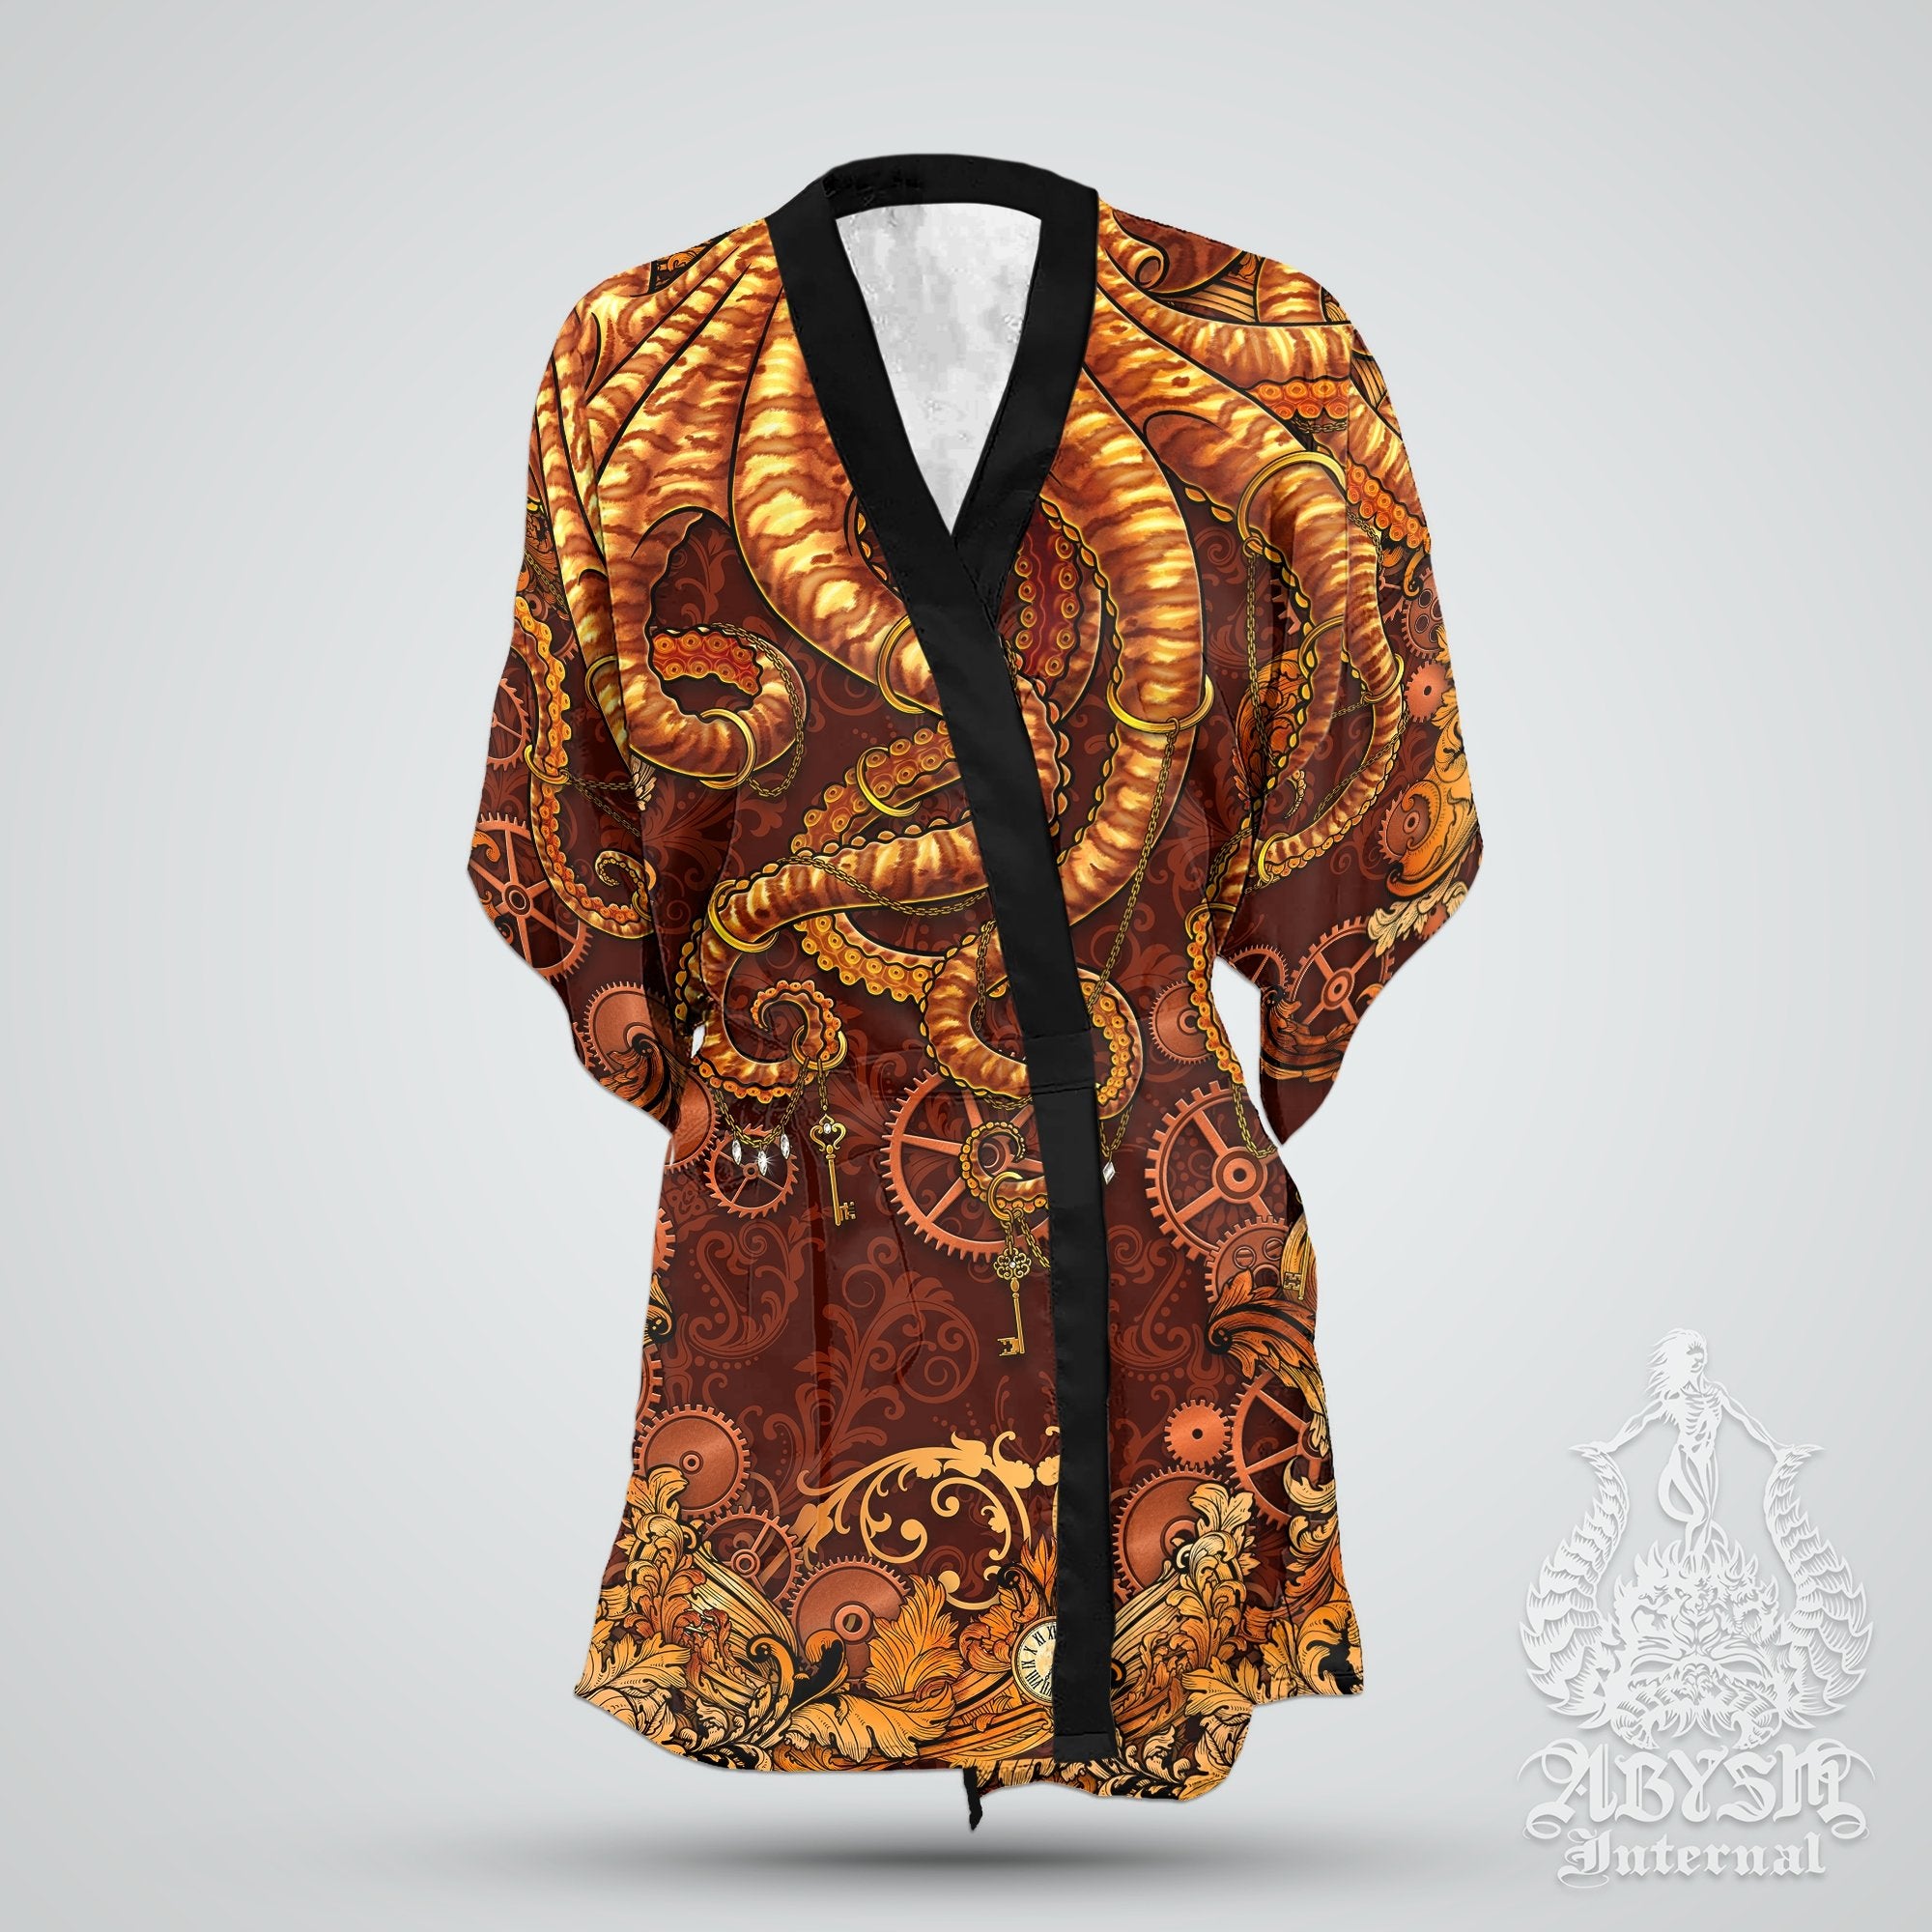 Steampunk Cover Up, Beach Outfit, Octopus Party Kimono, Beach Summer Festival Robe, Indie and Alternative Clothing, Unisex - Abysm Internal